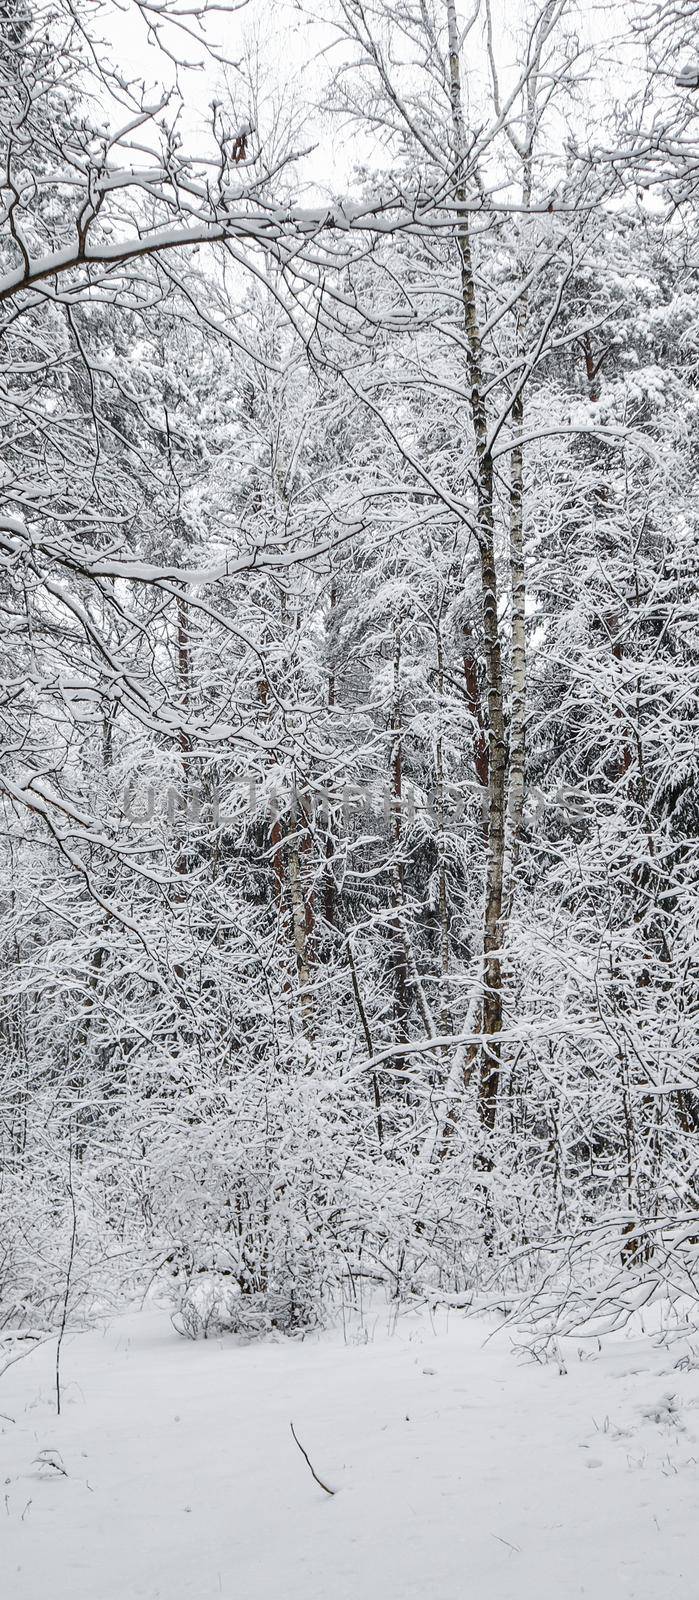 Snowy winter forest. Snow covered branches trees and bushes